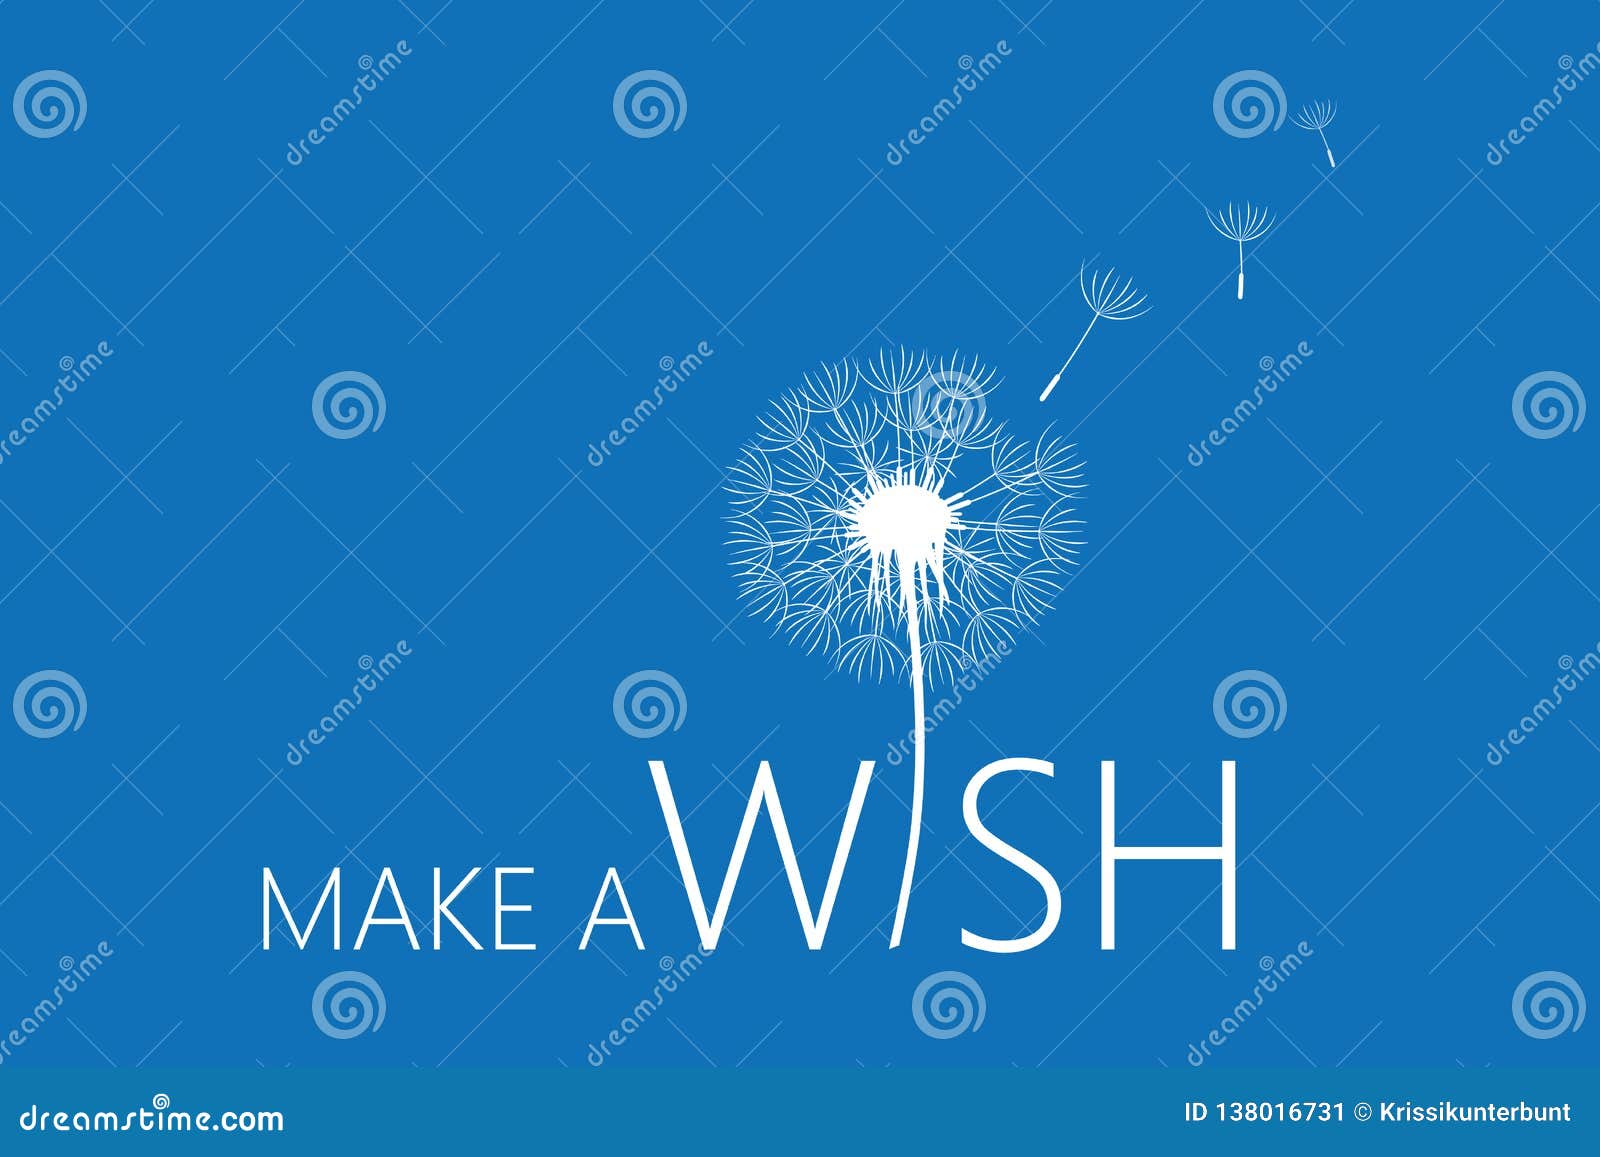 make a wish typography with dandelion